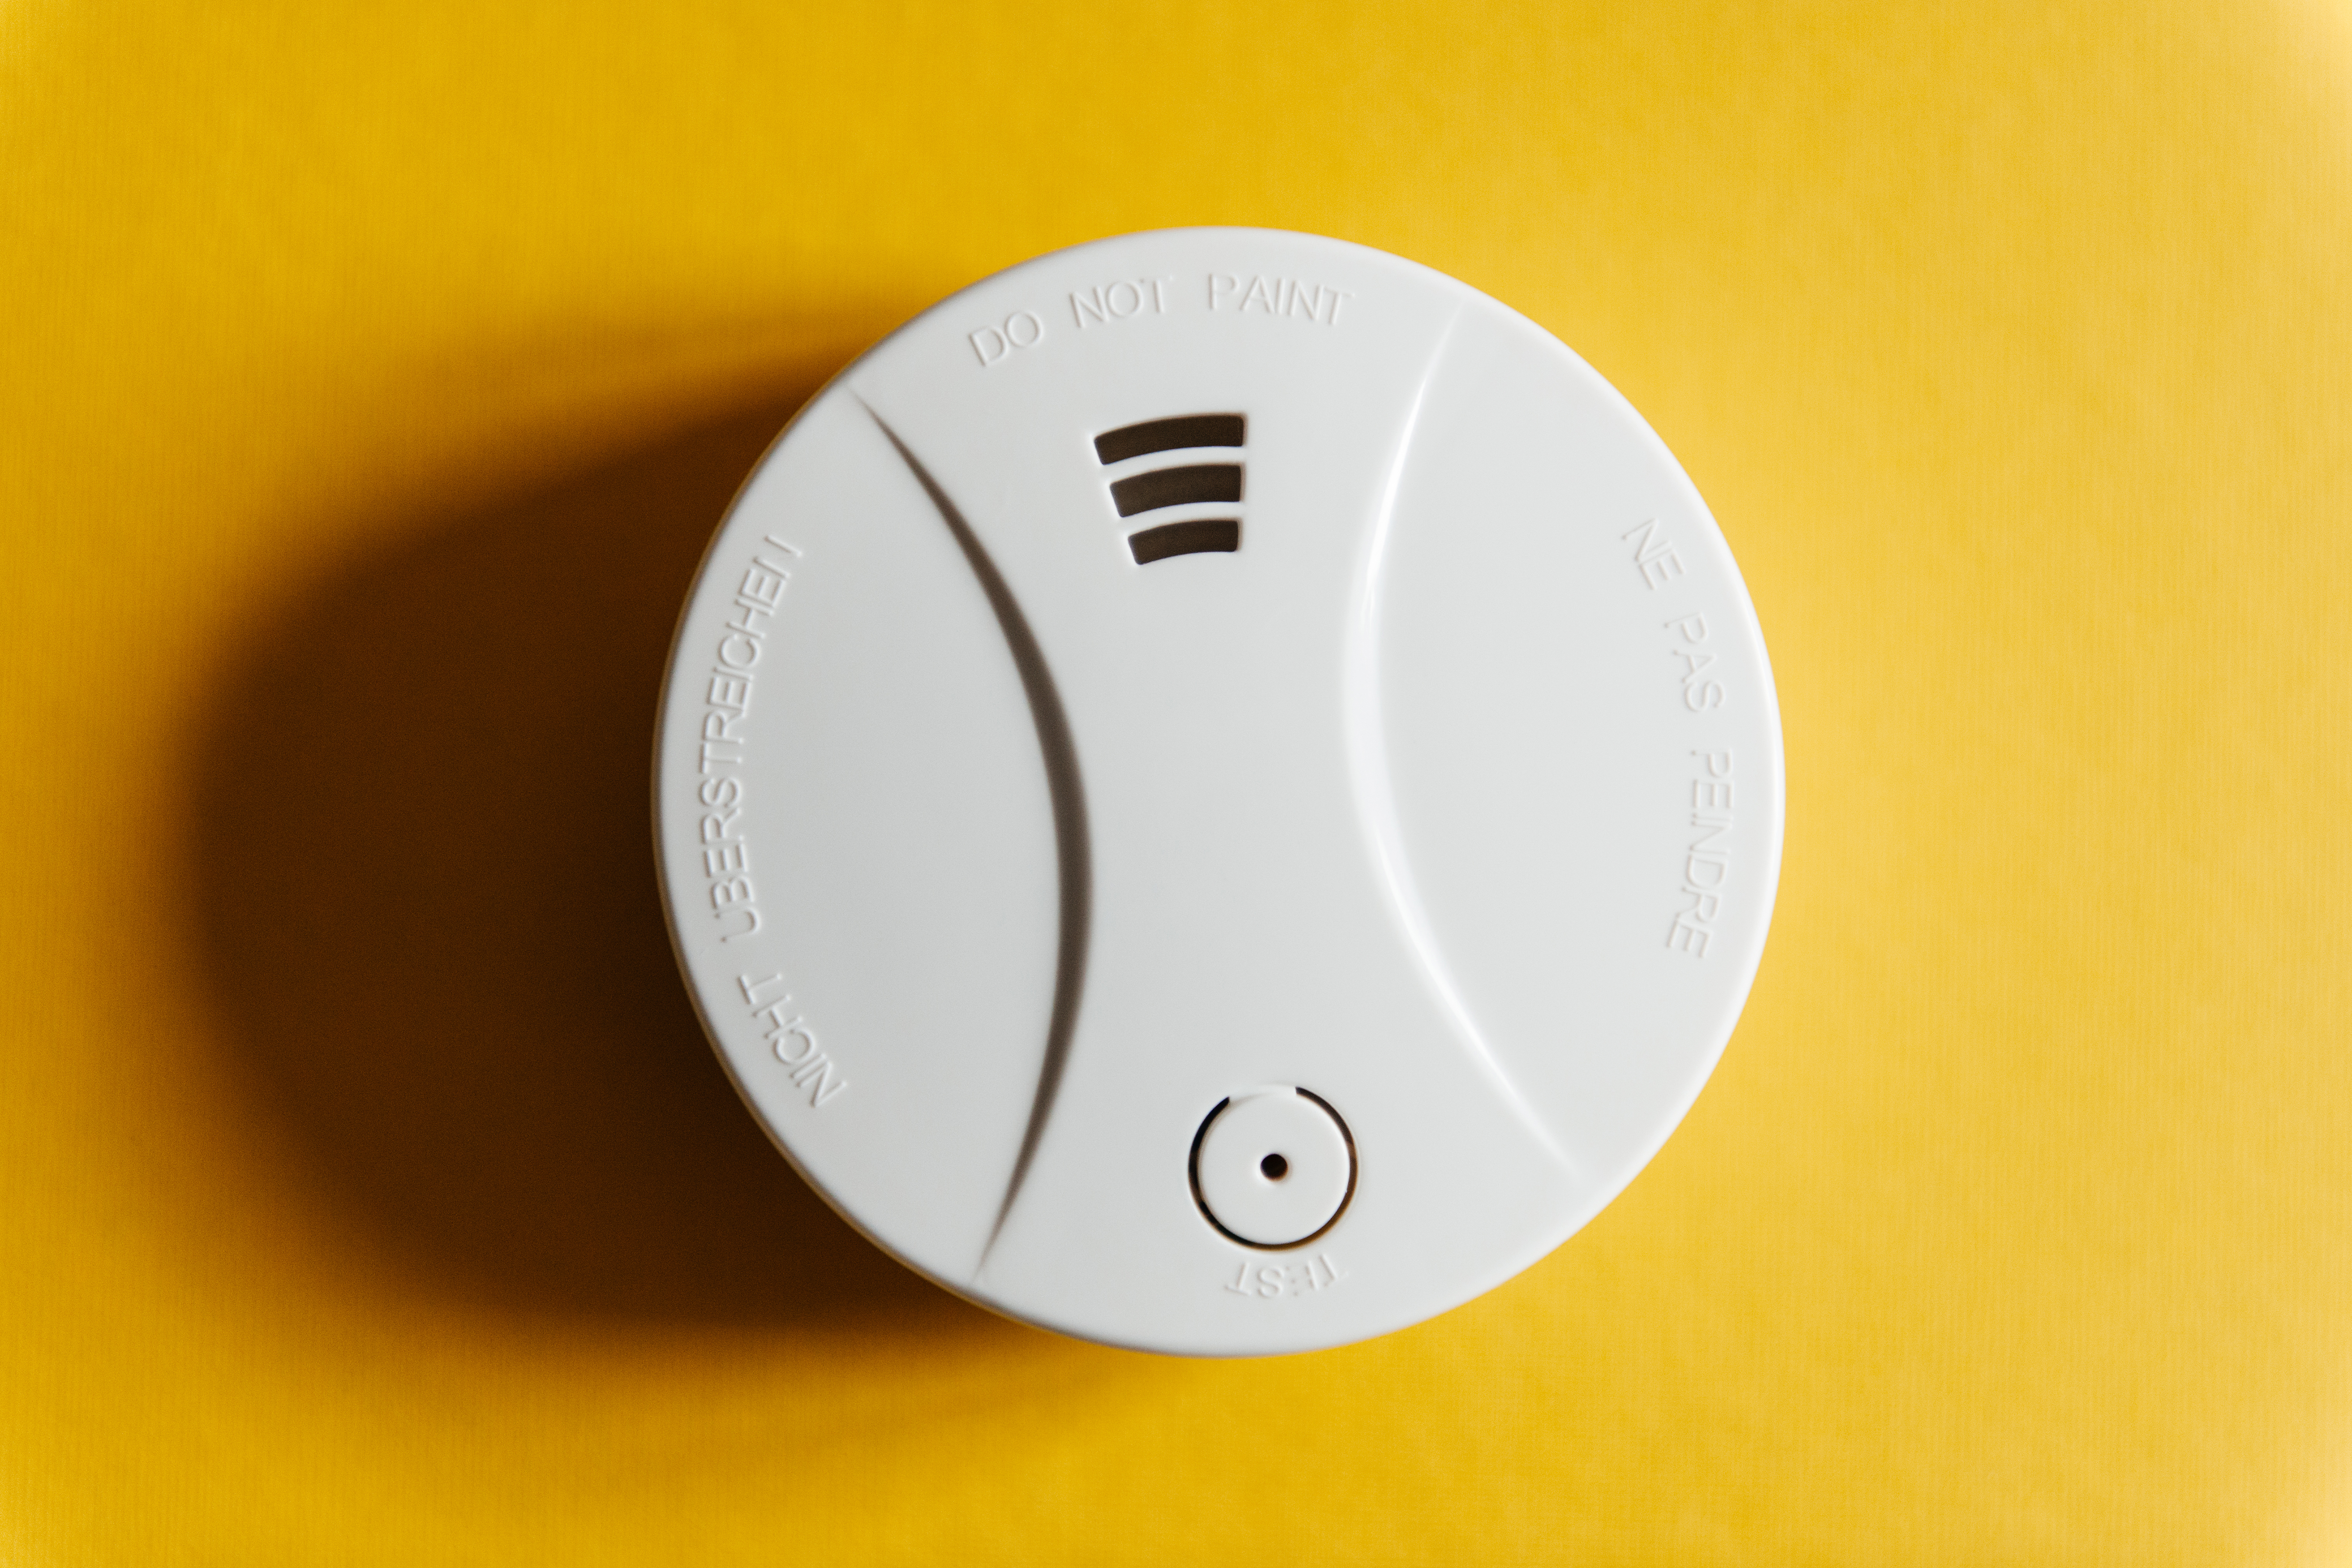 A smoke detector on a yellow background